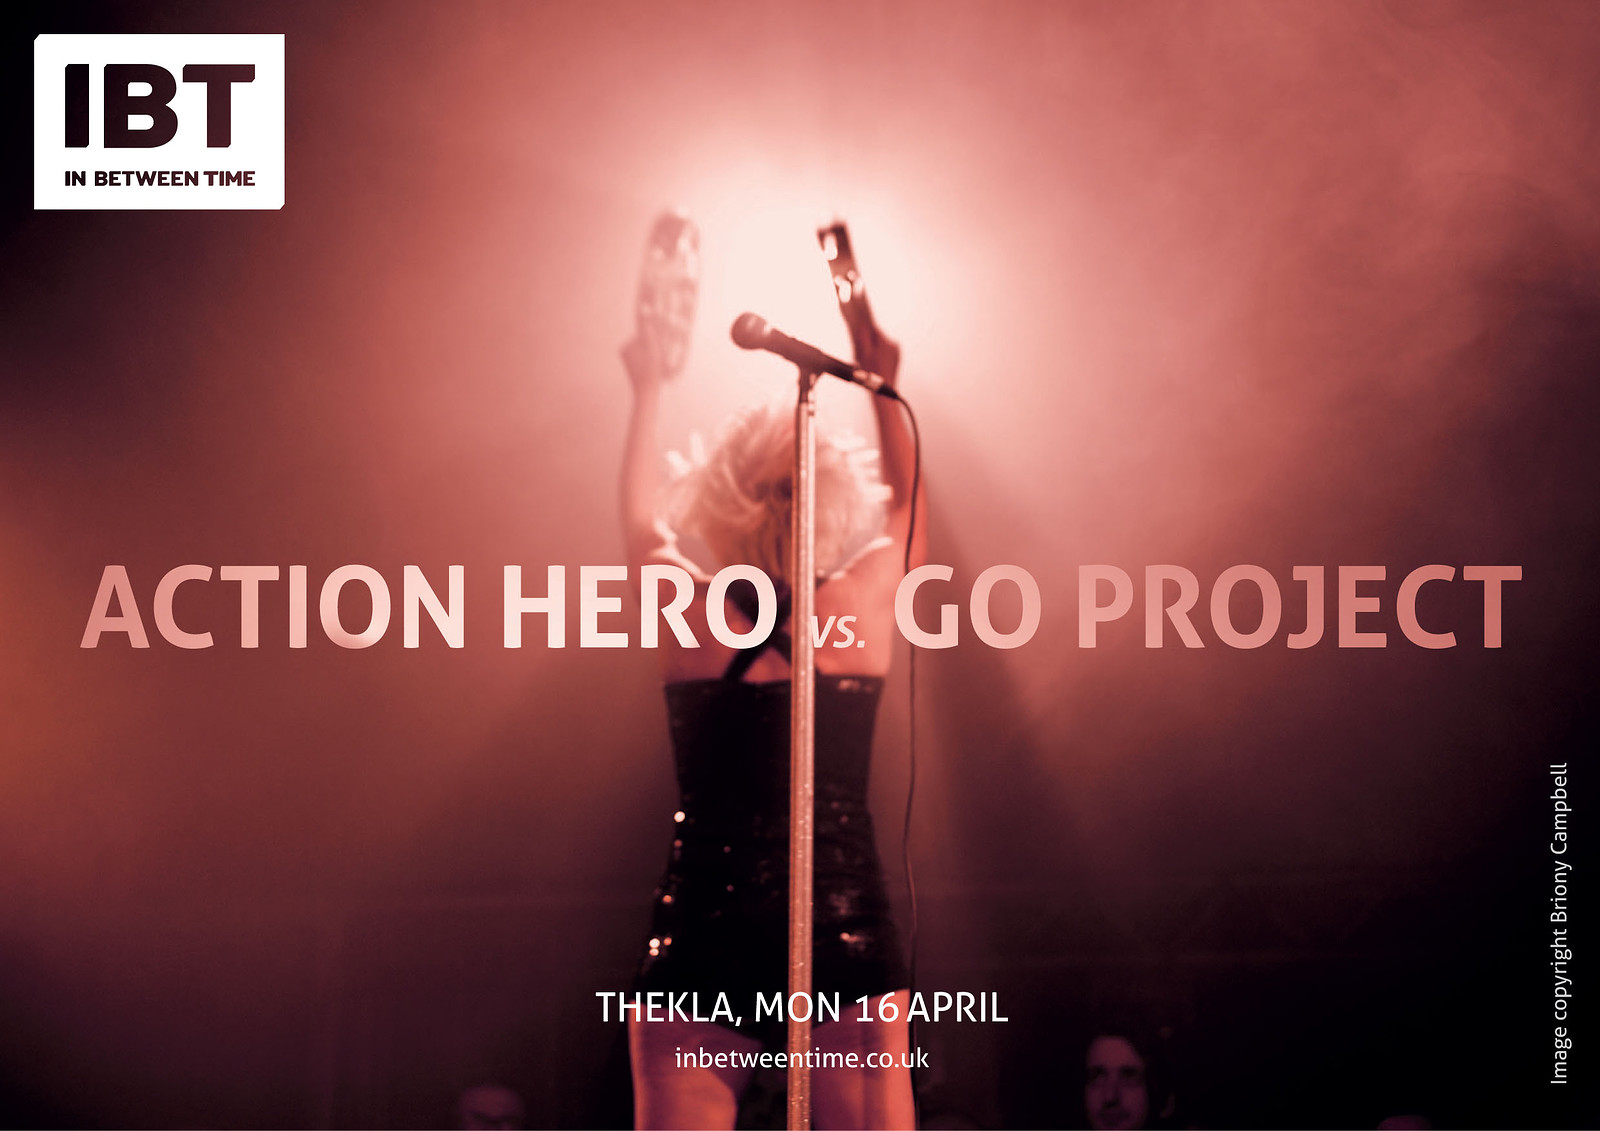 Action Hero Vs Go Project at Thekla